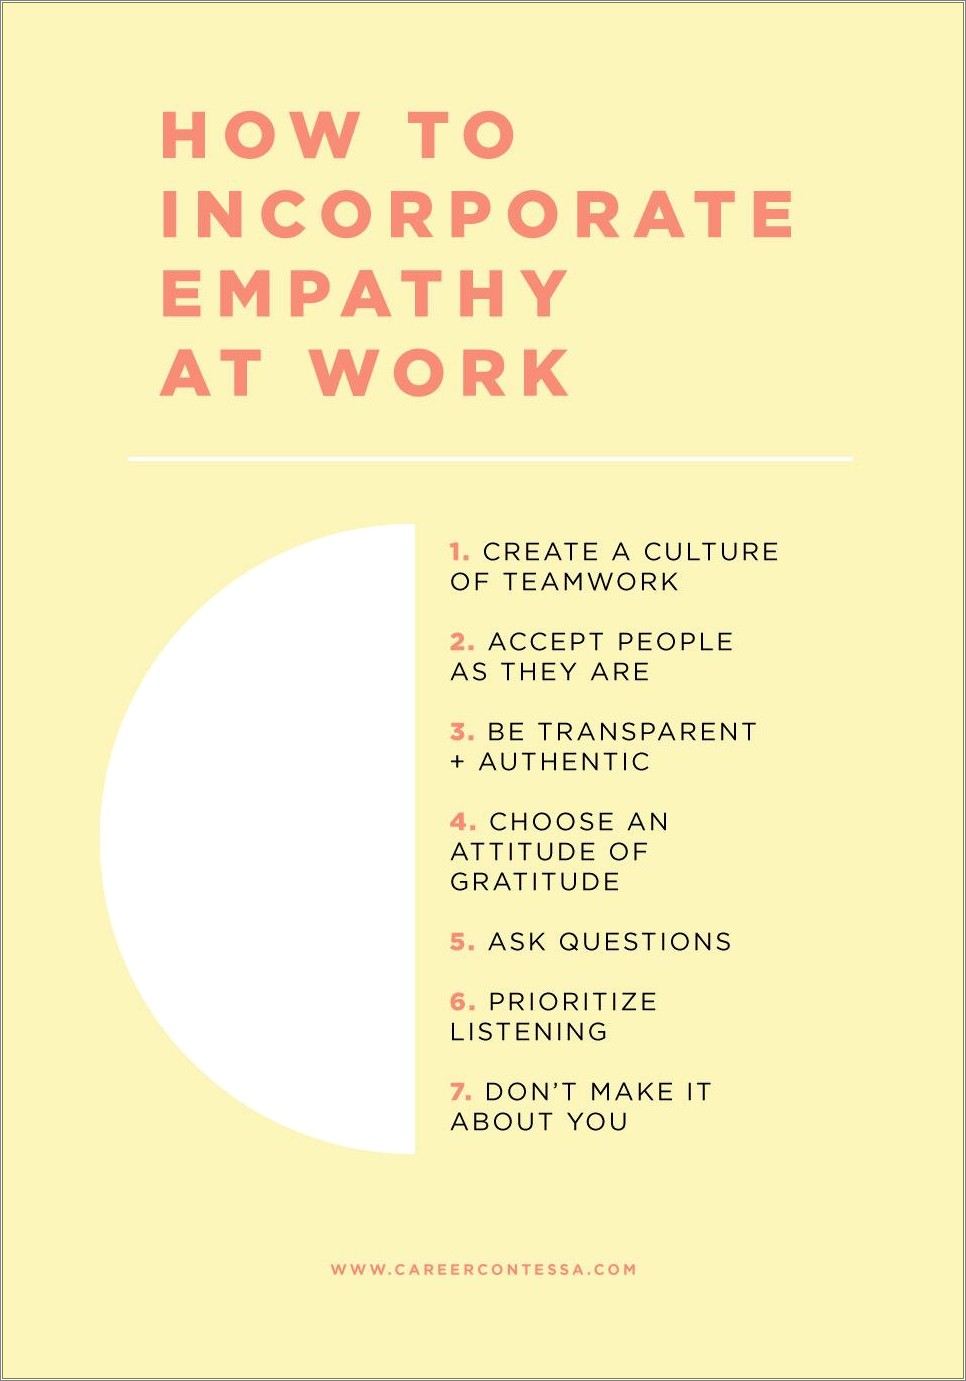 Is Empathy A Skill On A Resume